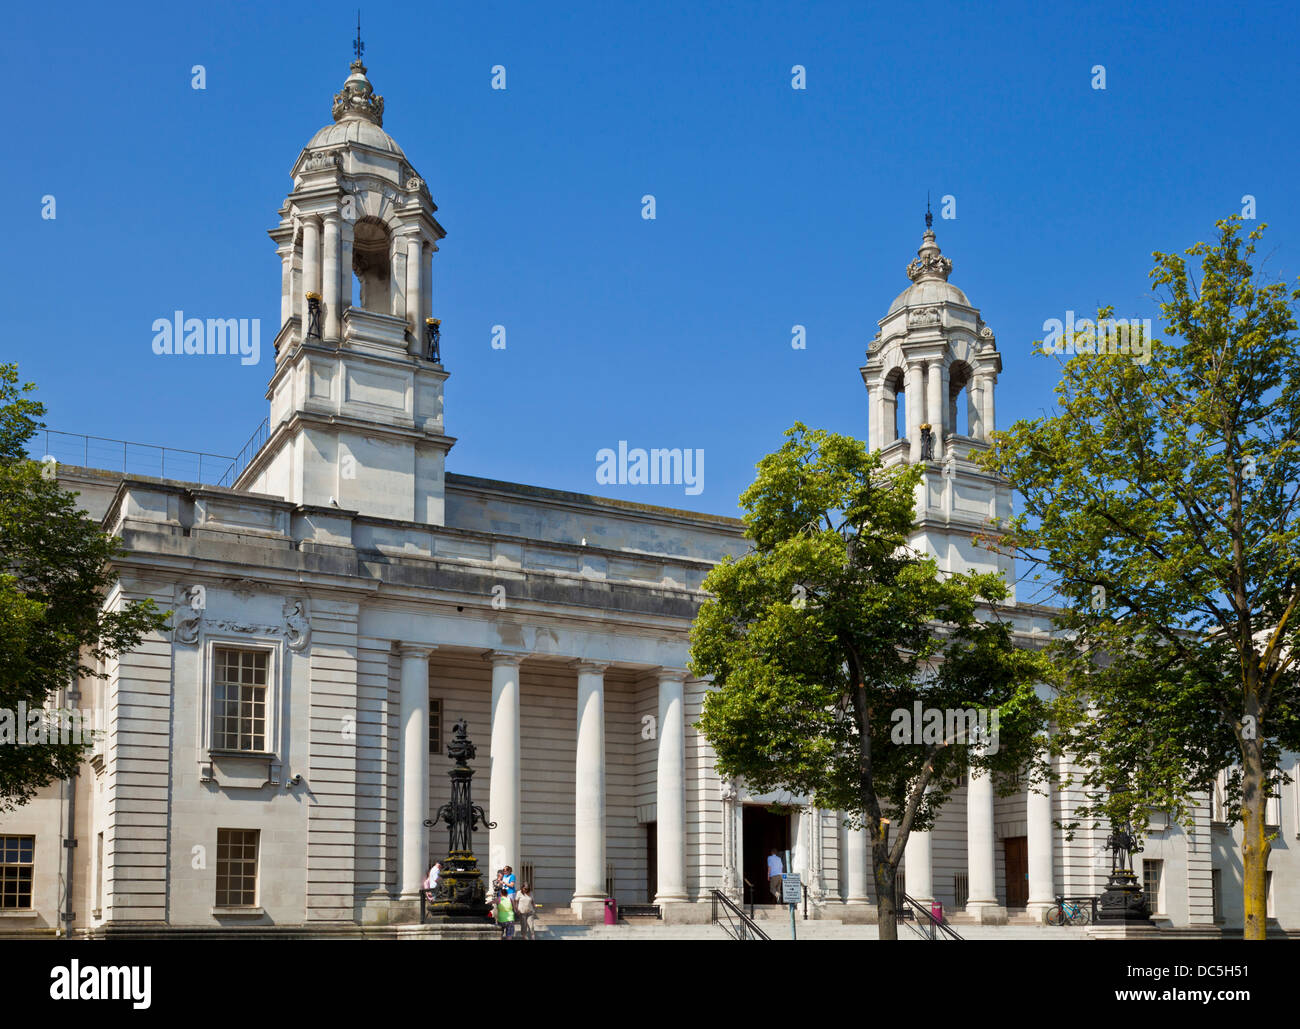 Cardiff Crown Court Law Courts Cardiff South Glamorgan South Wales UK GB EU Europe Stock Photo